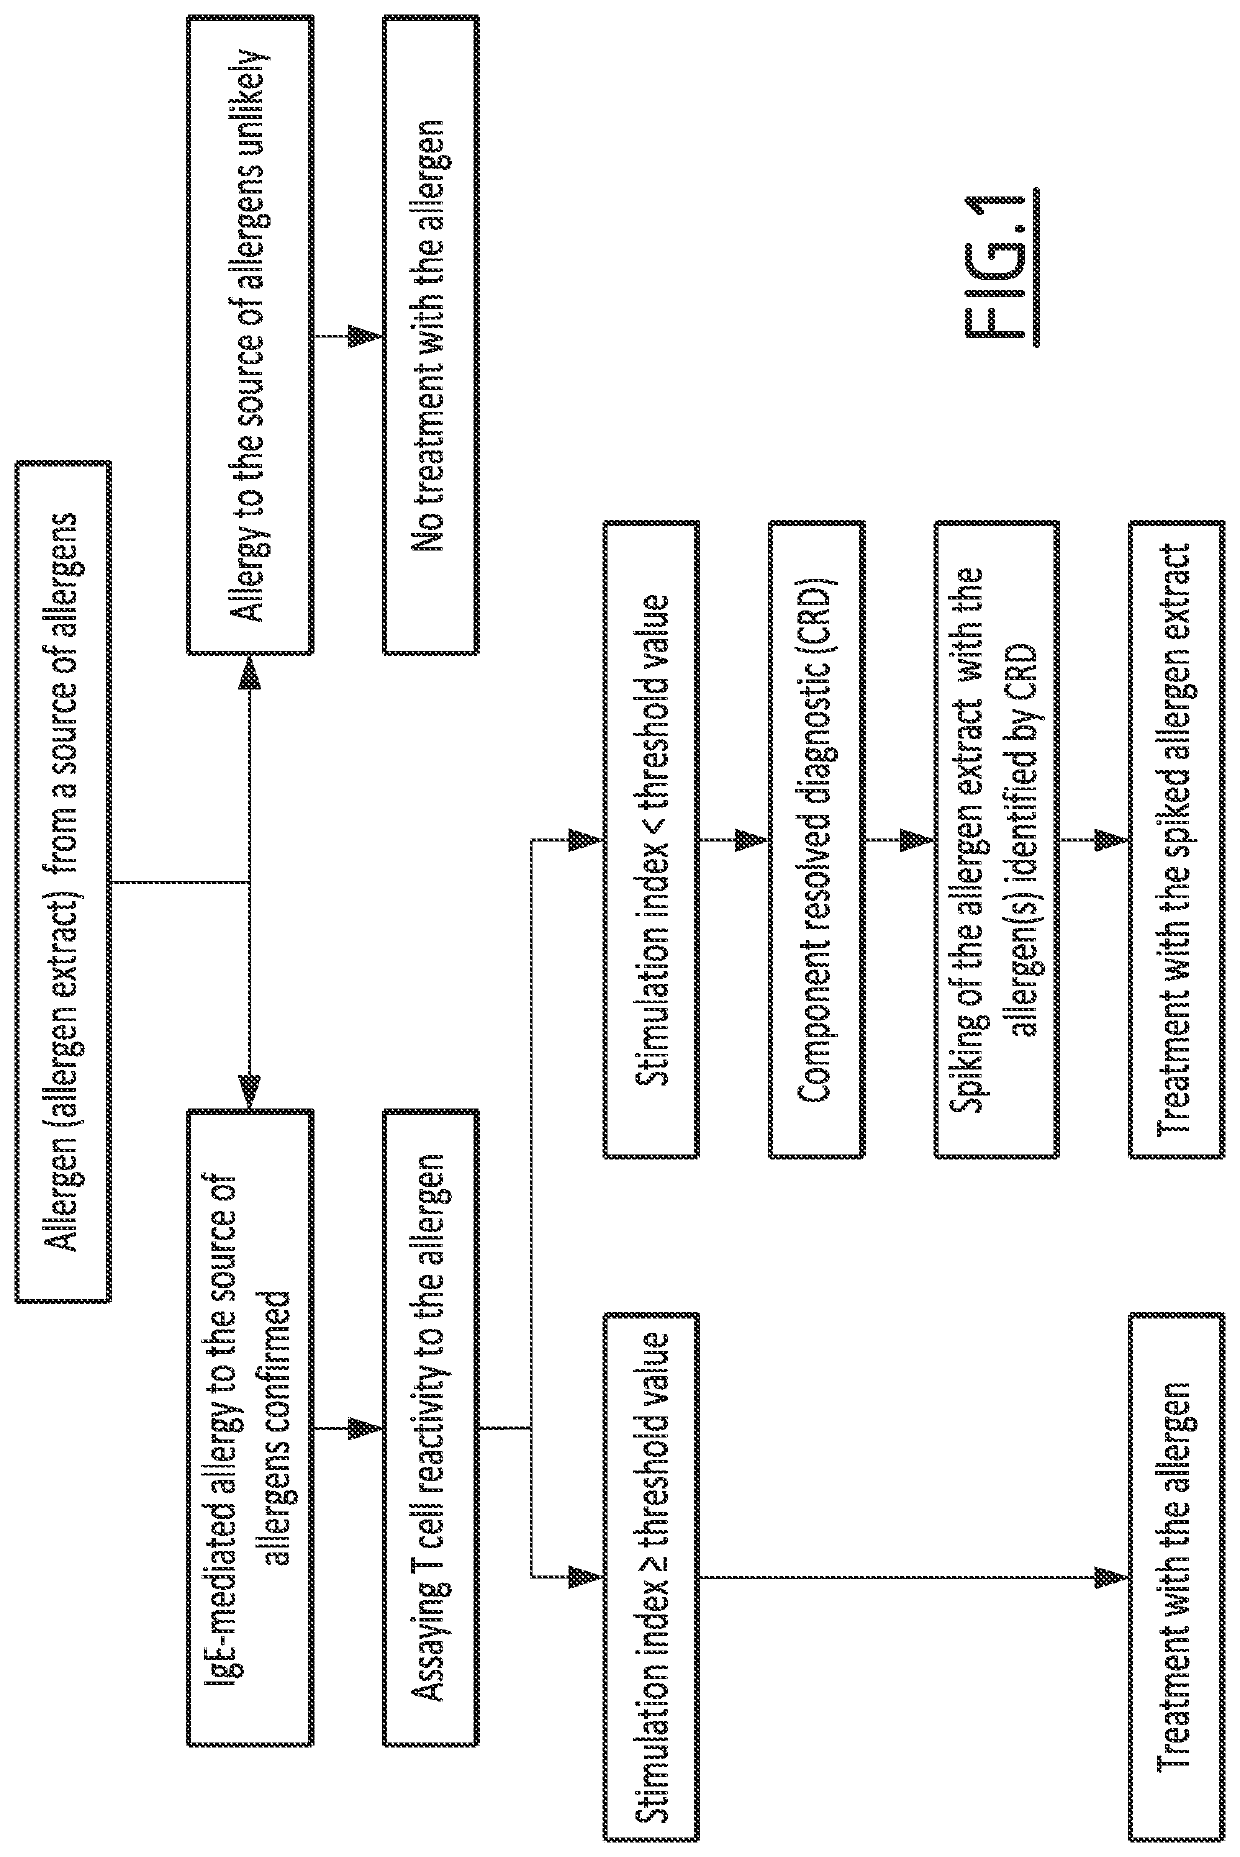 Method for classifying an allergic patient as eligible to allergen immunotherapy